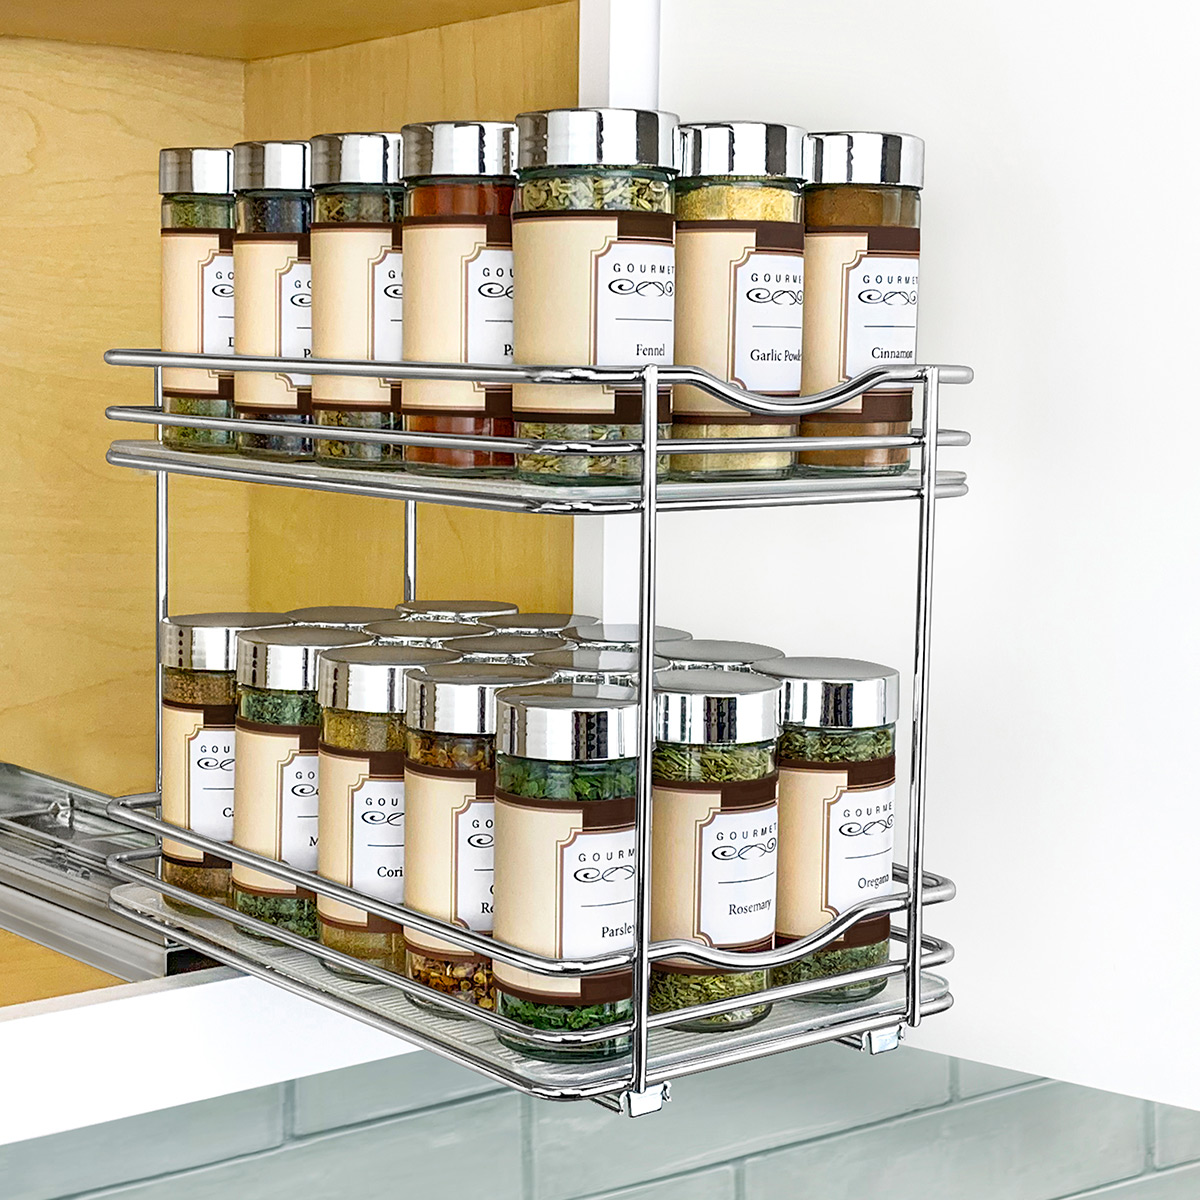 https://www.containerstore.com/catalogimages/364488/10077219-Lynk-Double-Spice-Wide-Chro.jpg